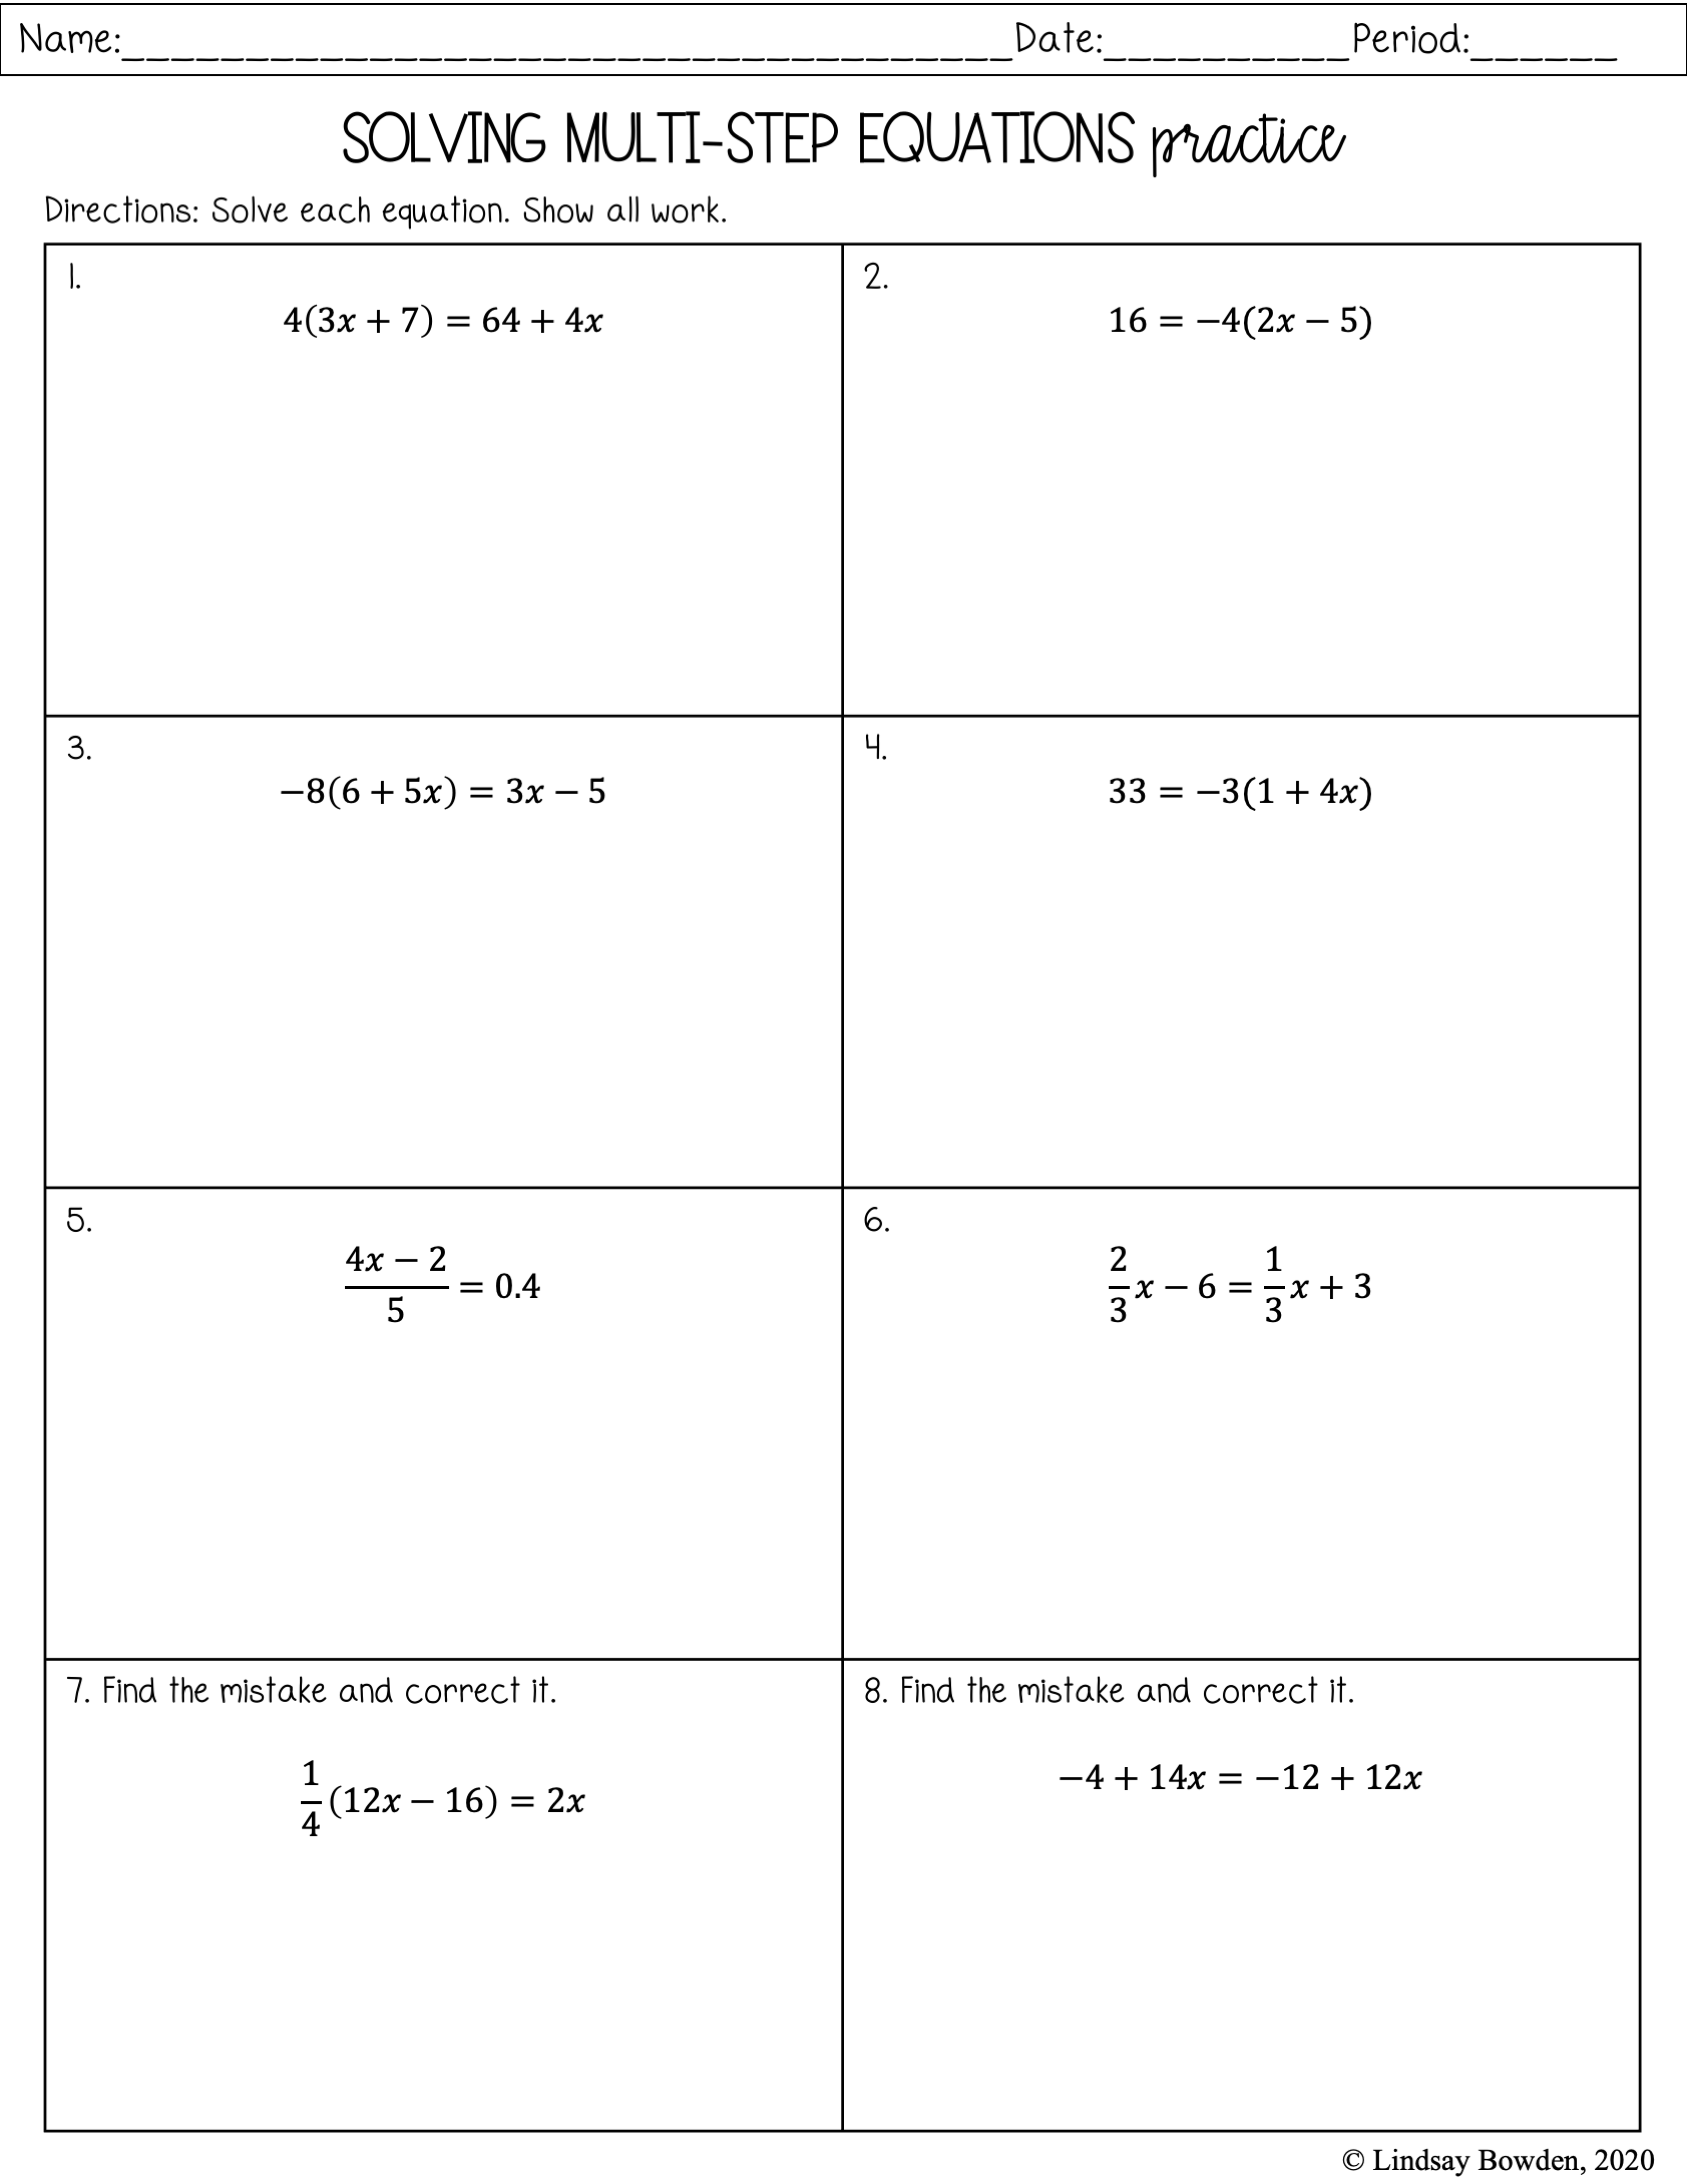 Multi-Step Equation Notes and Worksheets - Lindsay Bowden In 2 Step Equations Worksheet